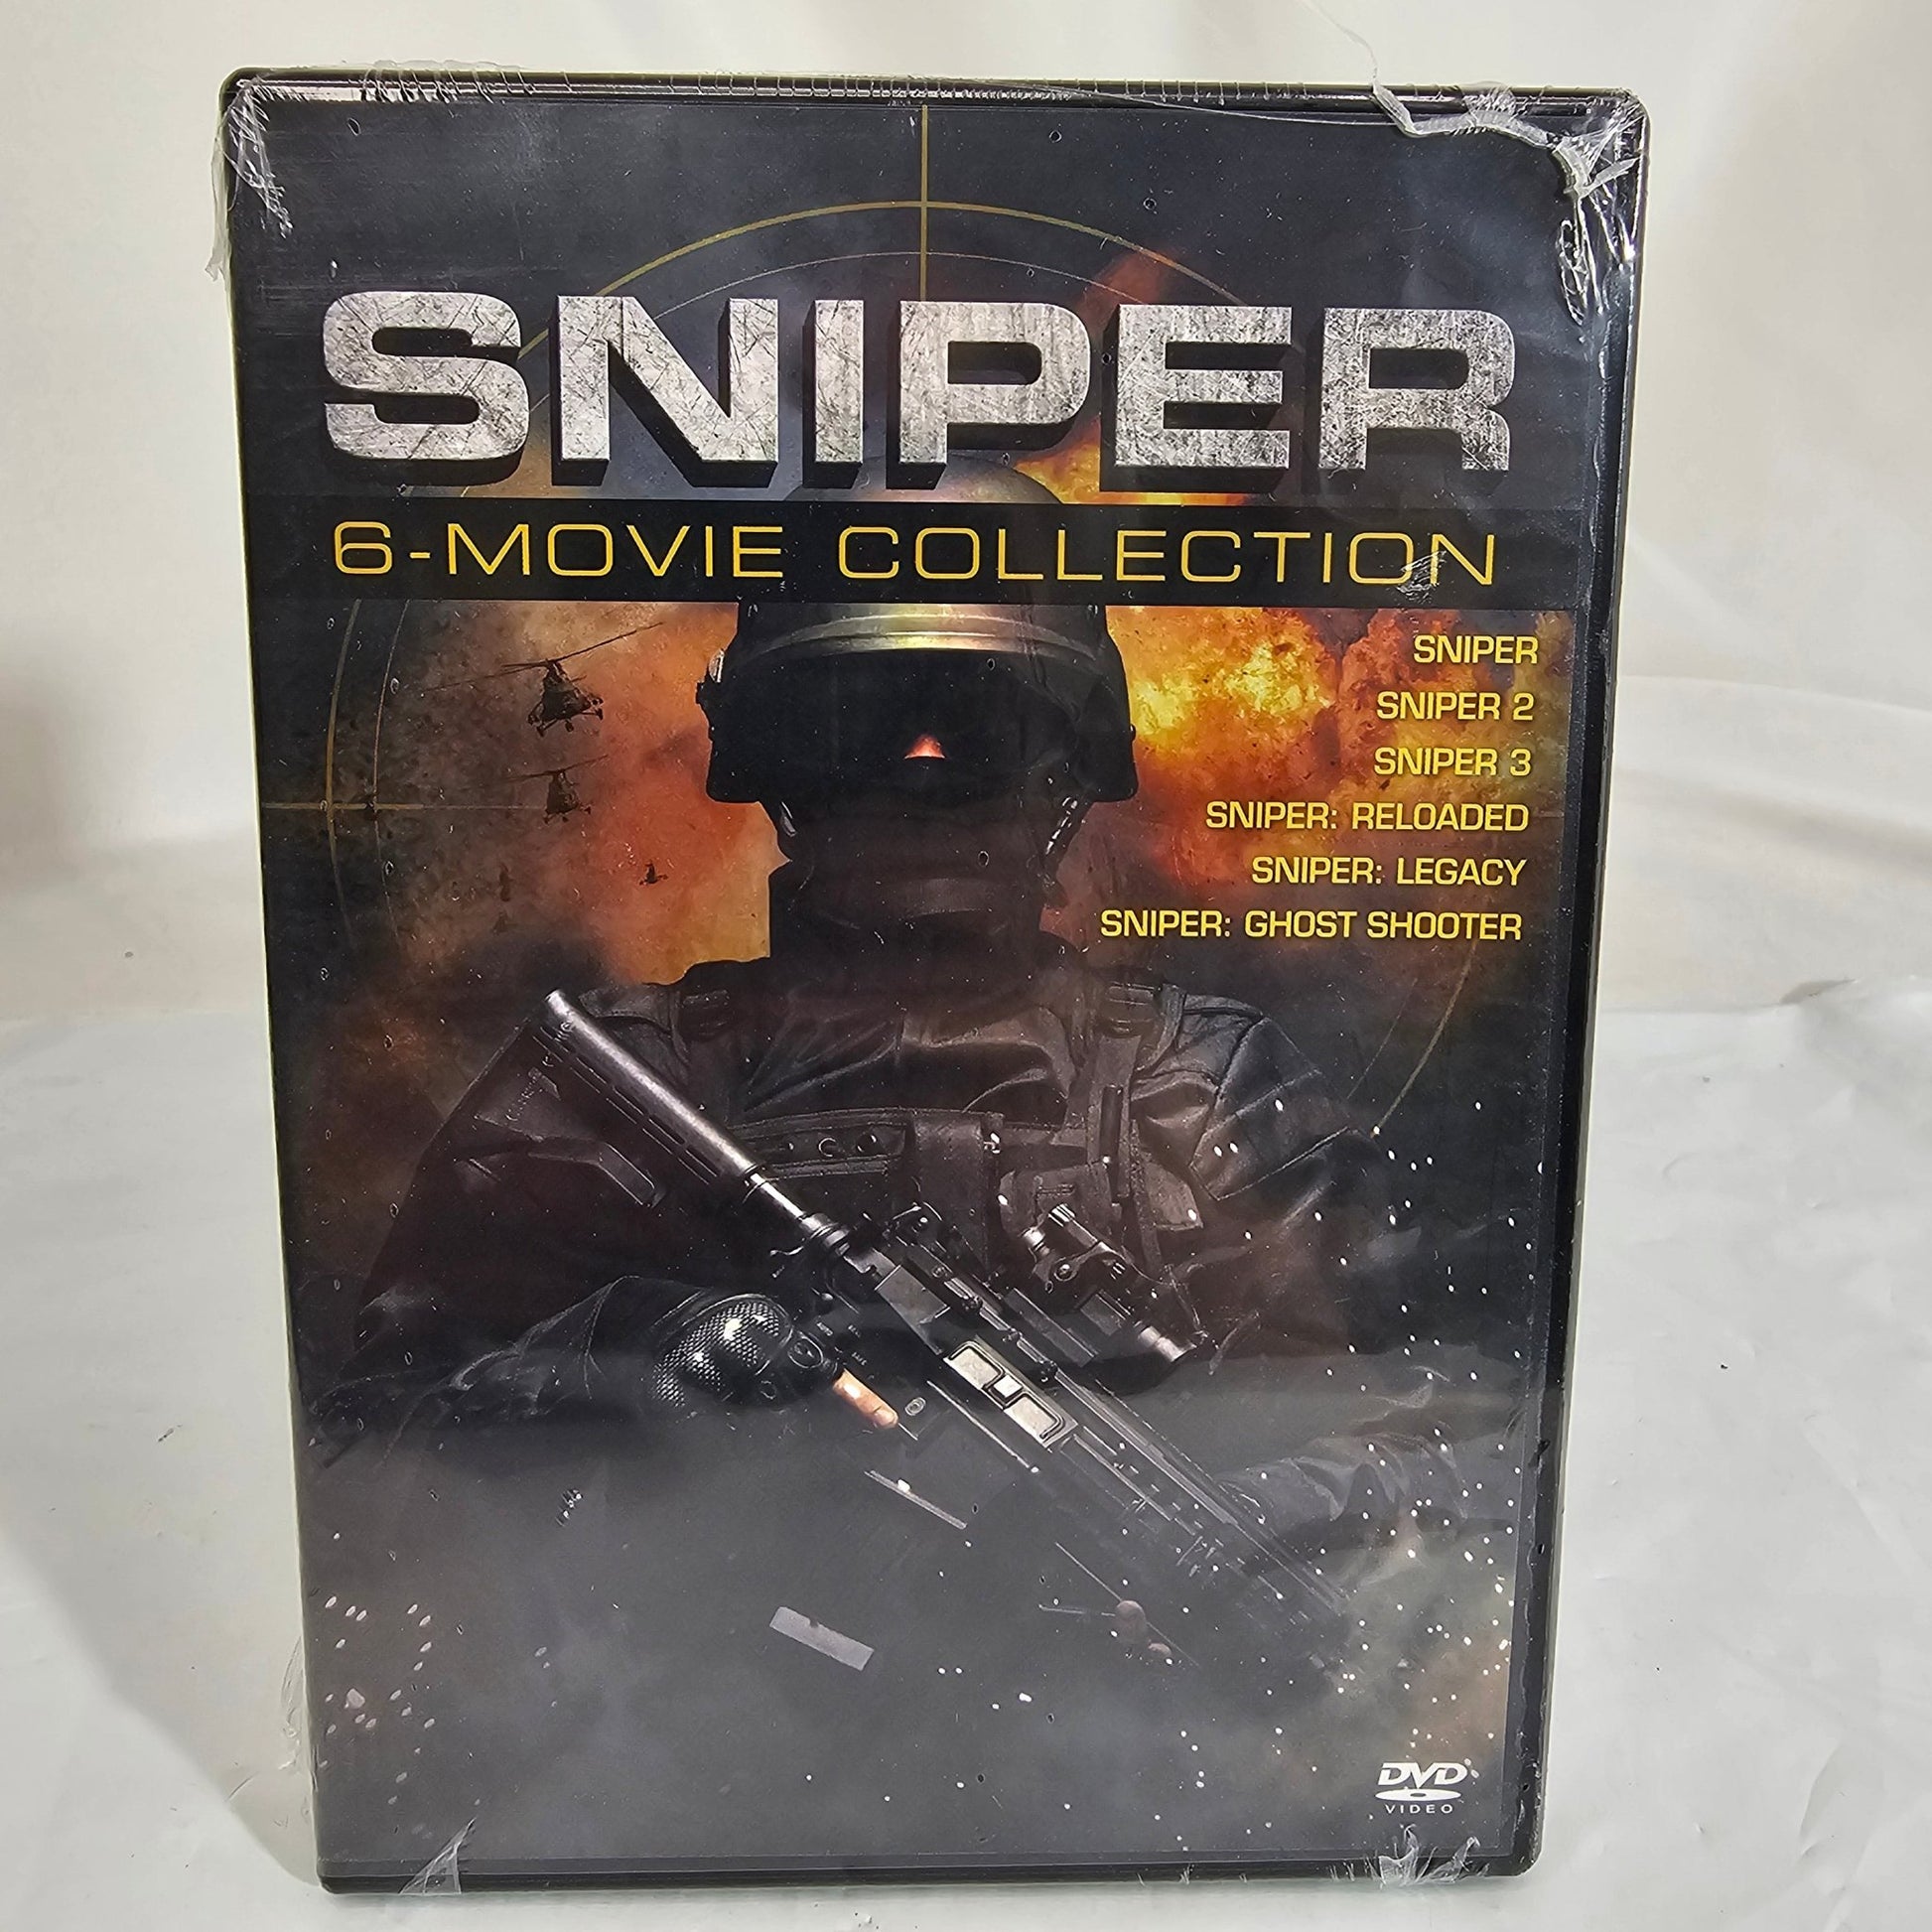 Sniper:  6 movie Collection Sniper (1993), Sniper 2, Sniper 3, Sniper: Reloaded, Sniper: Ghost Shooter, and Sniper: Legacy DVD - DQ Distribution